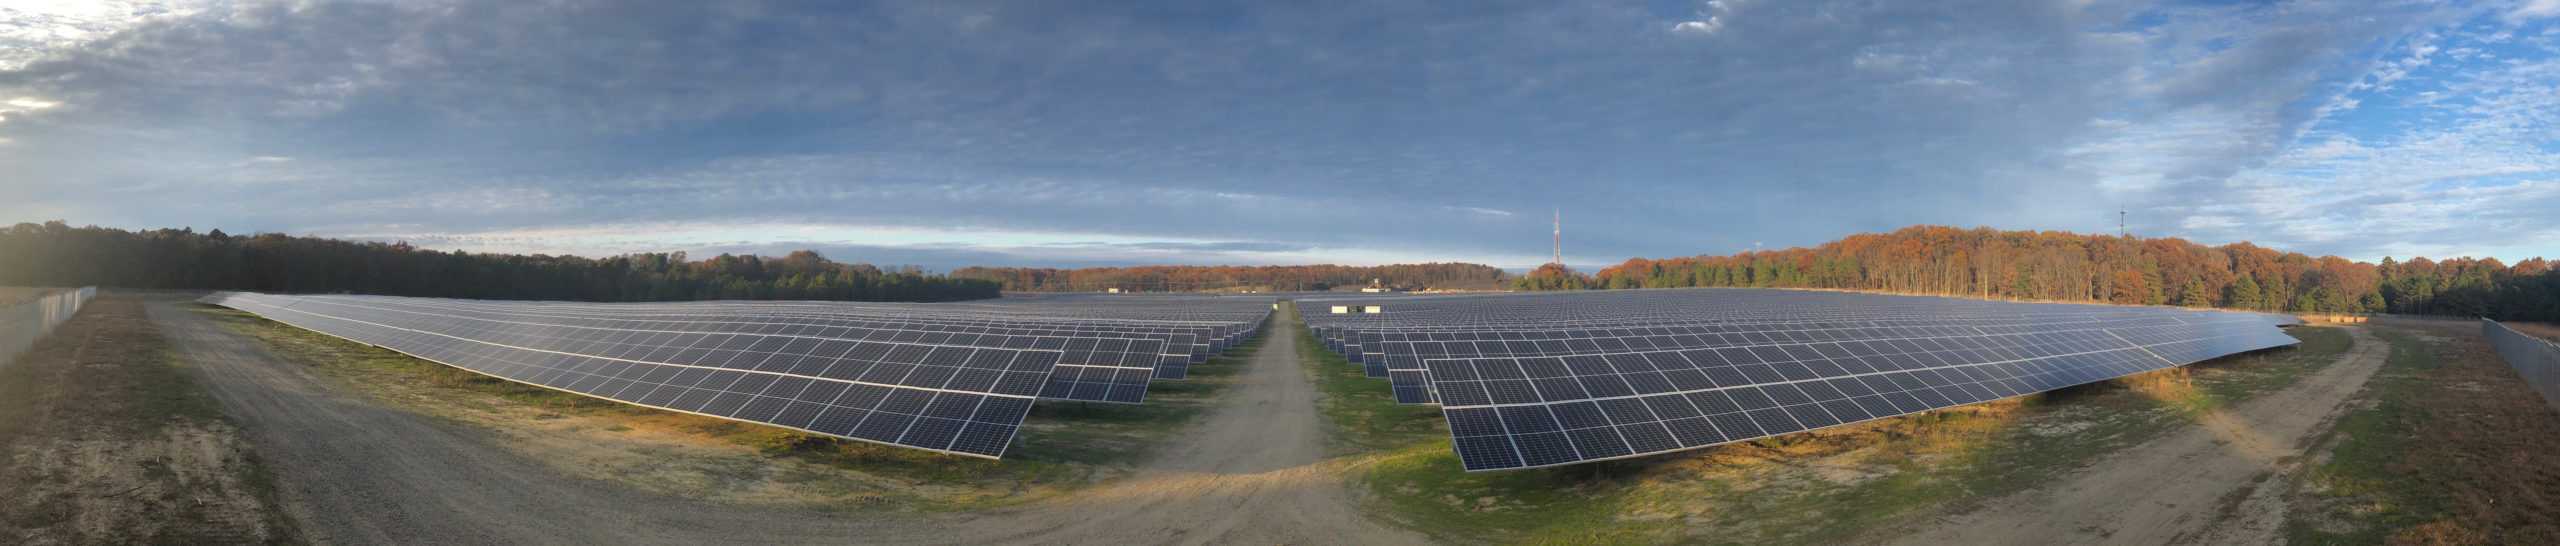 Carroll Engineering Provides Land Surveying and Civil Engineering Services for NJ Largest Solar Plant – CS Energy